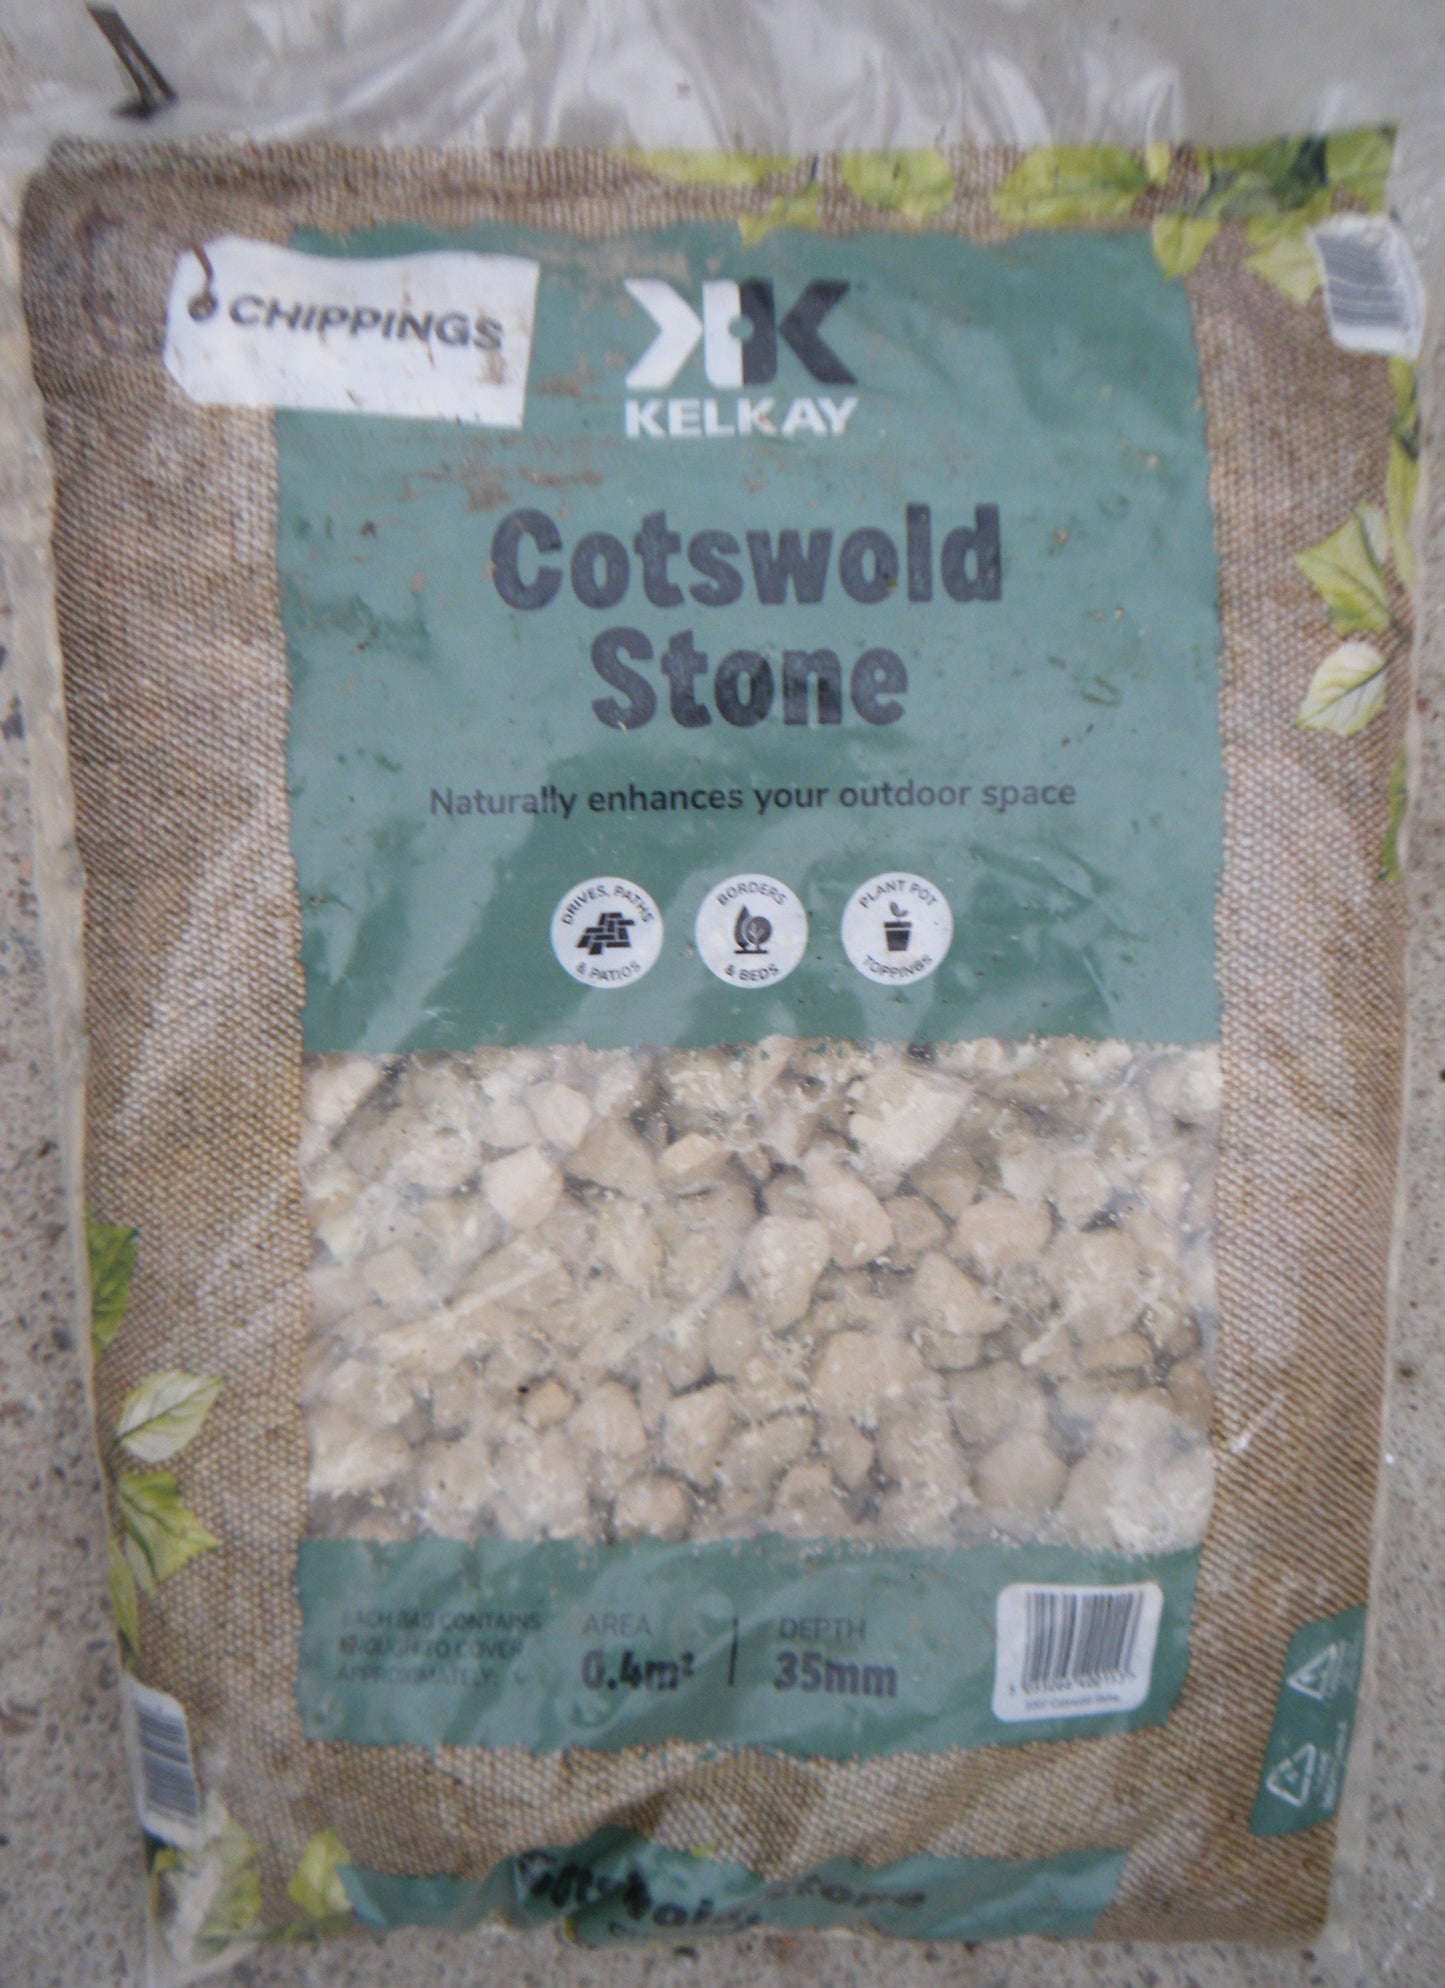 Chippings - Cotswold Stone